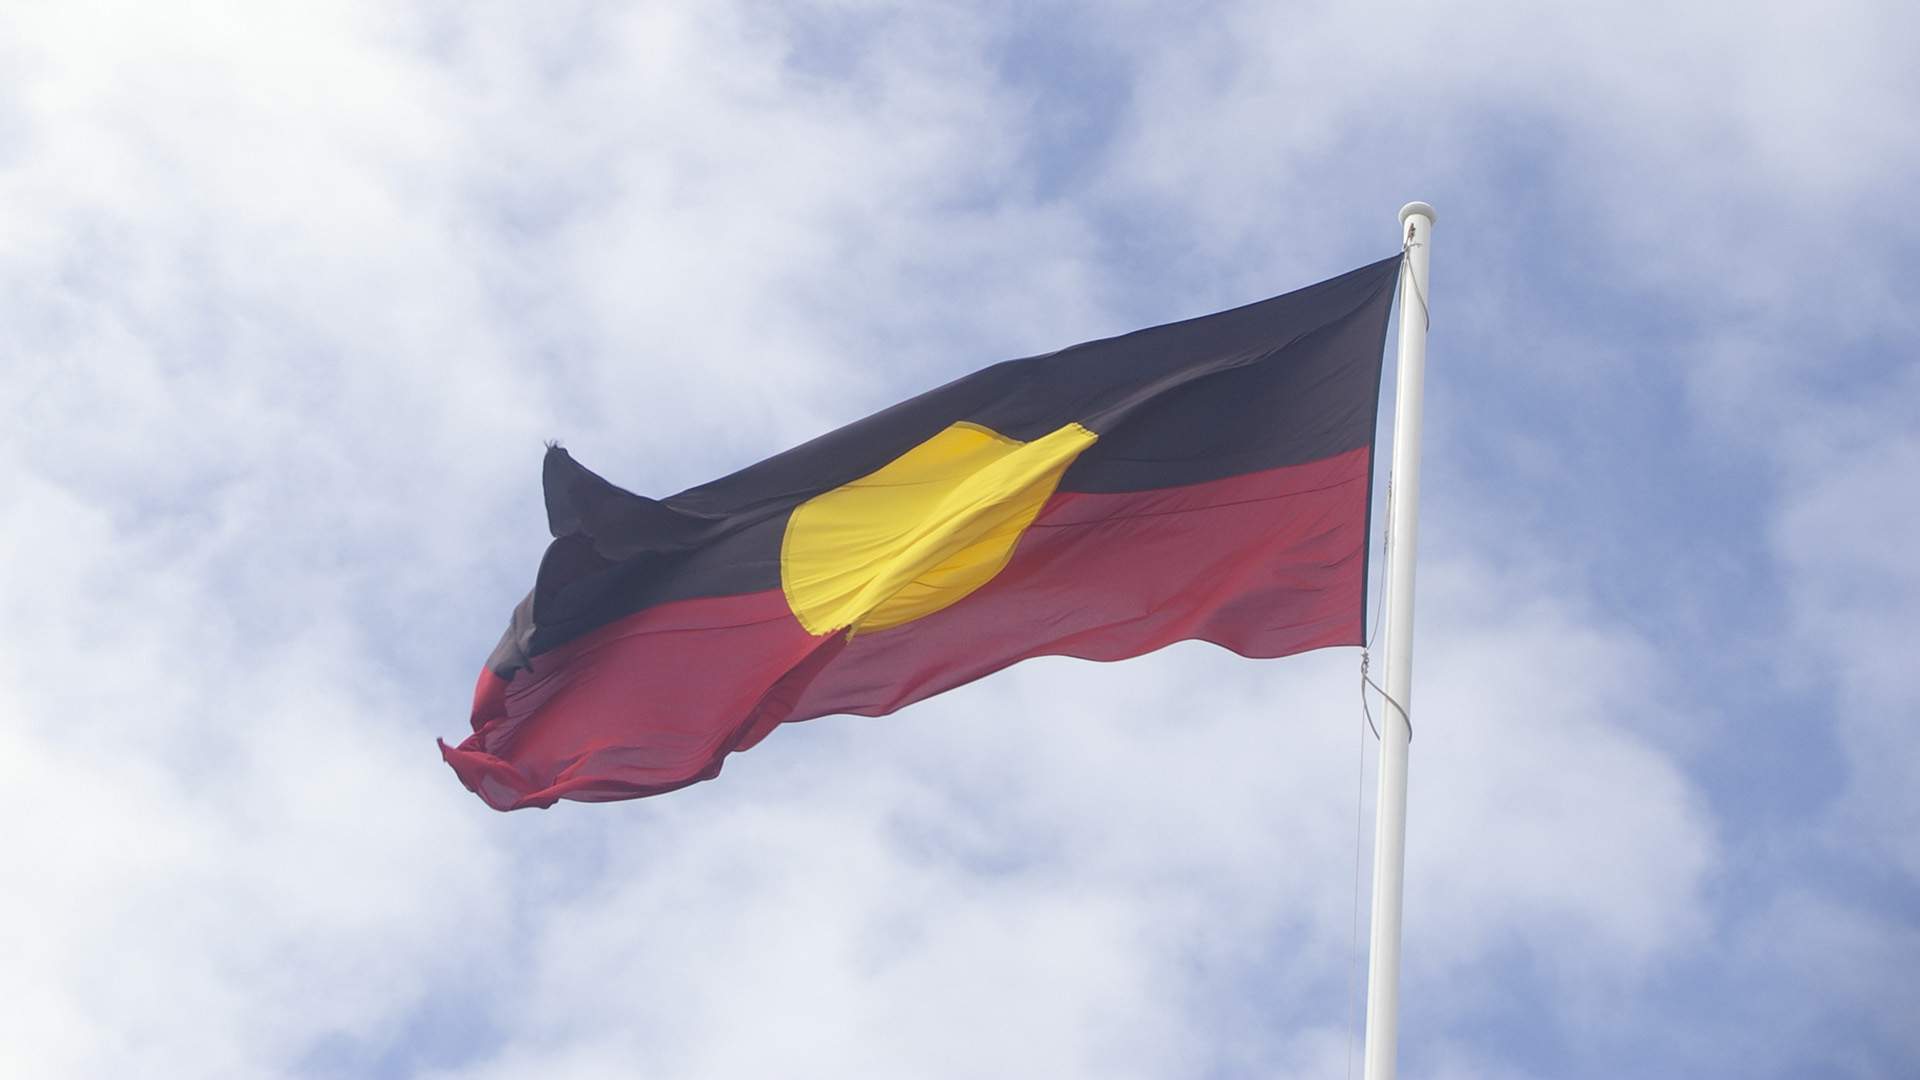 This Brisbane Petition Is Calling for the Indigenous Flags to Fly Permanently on the Story Bridge